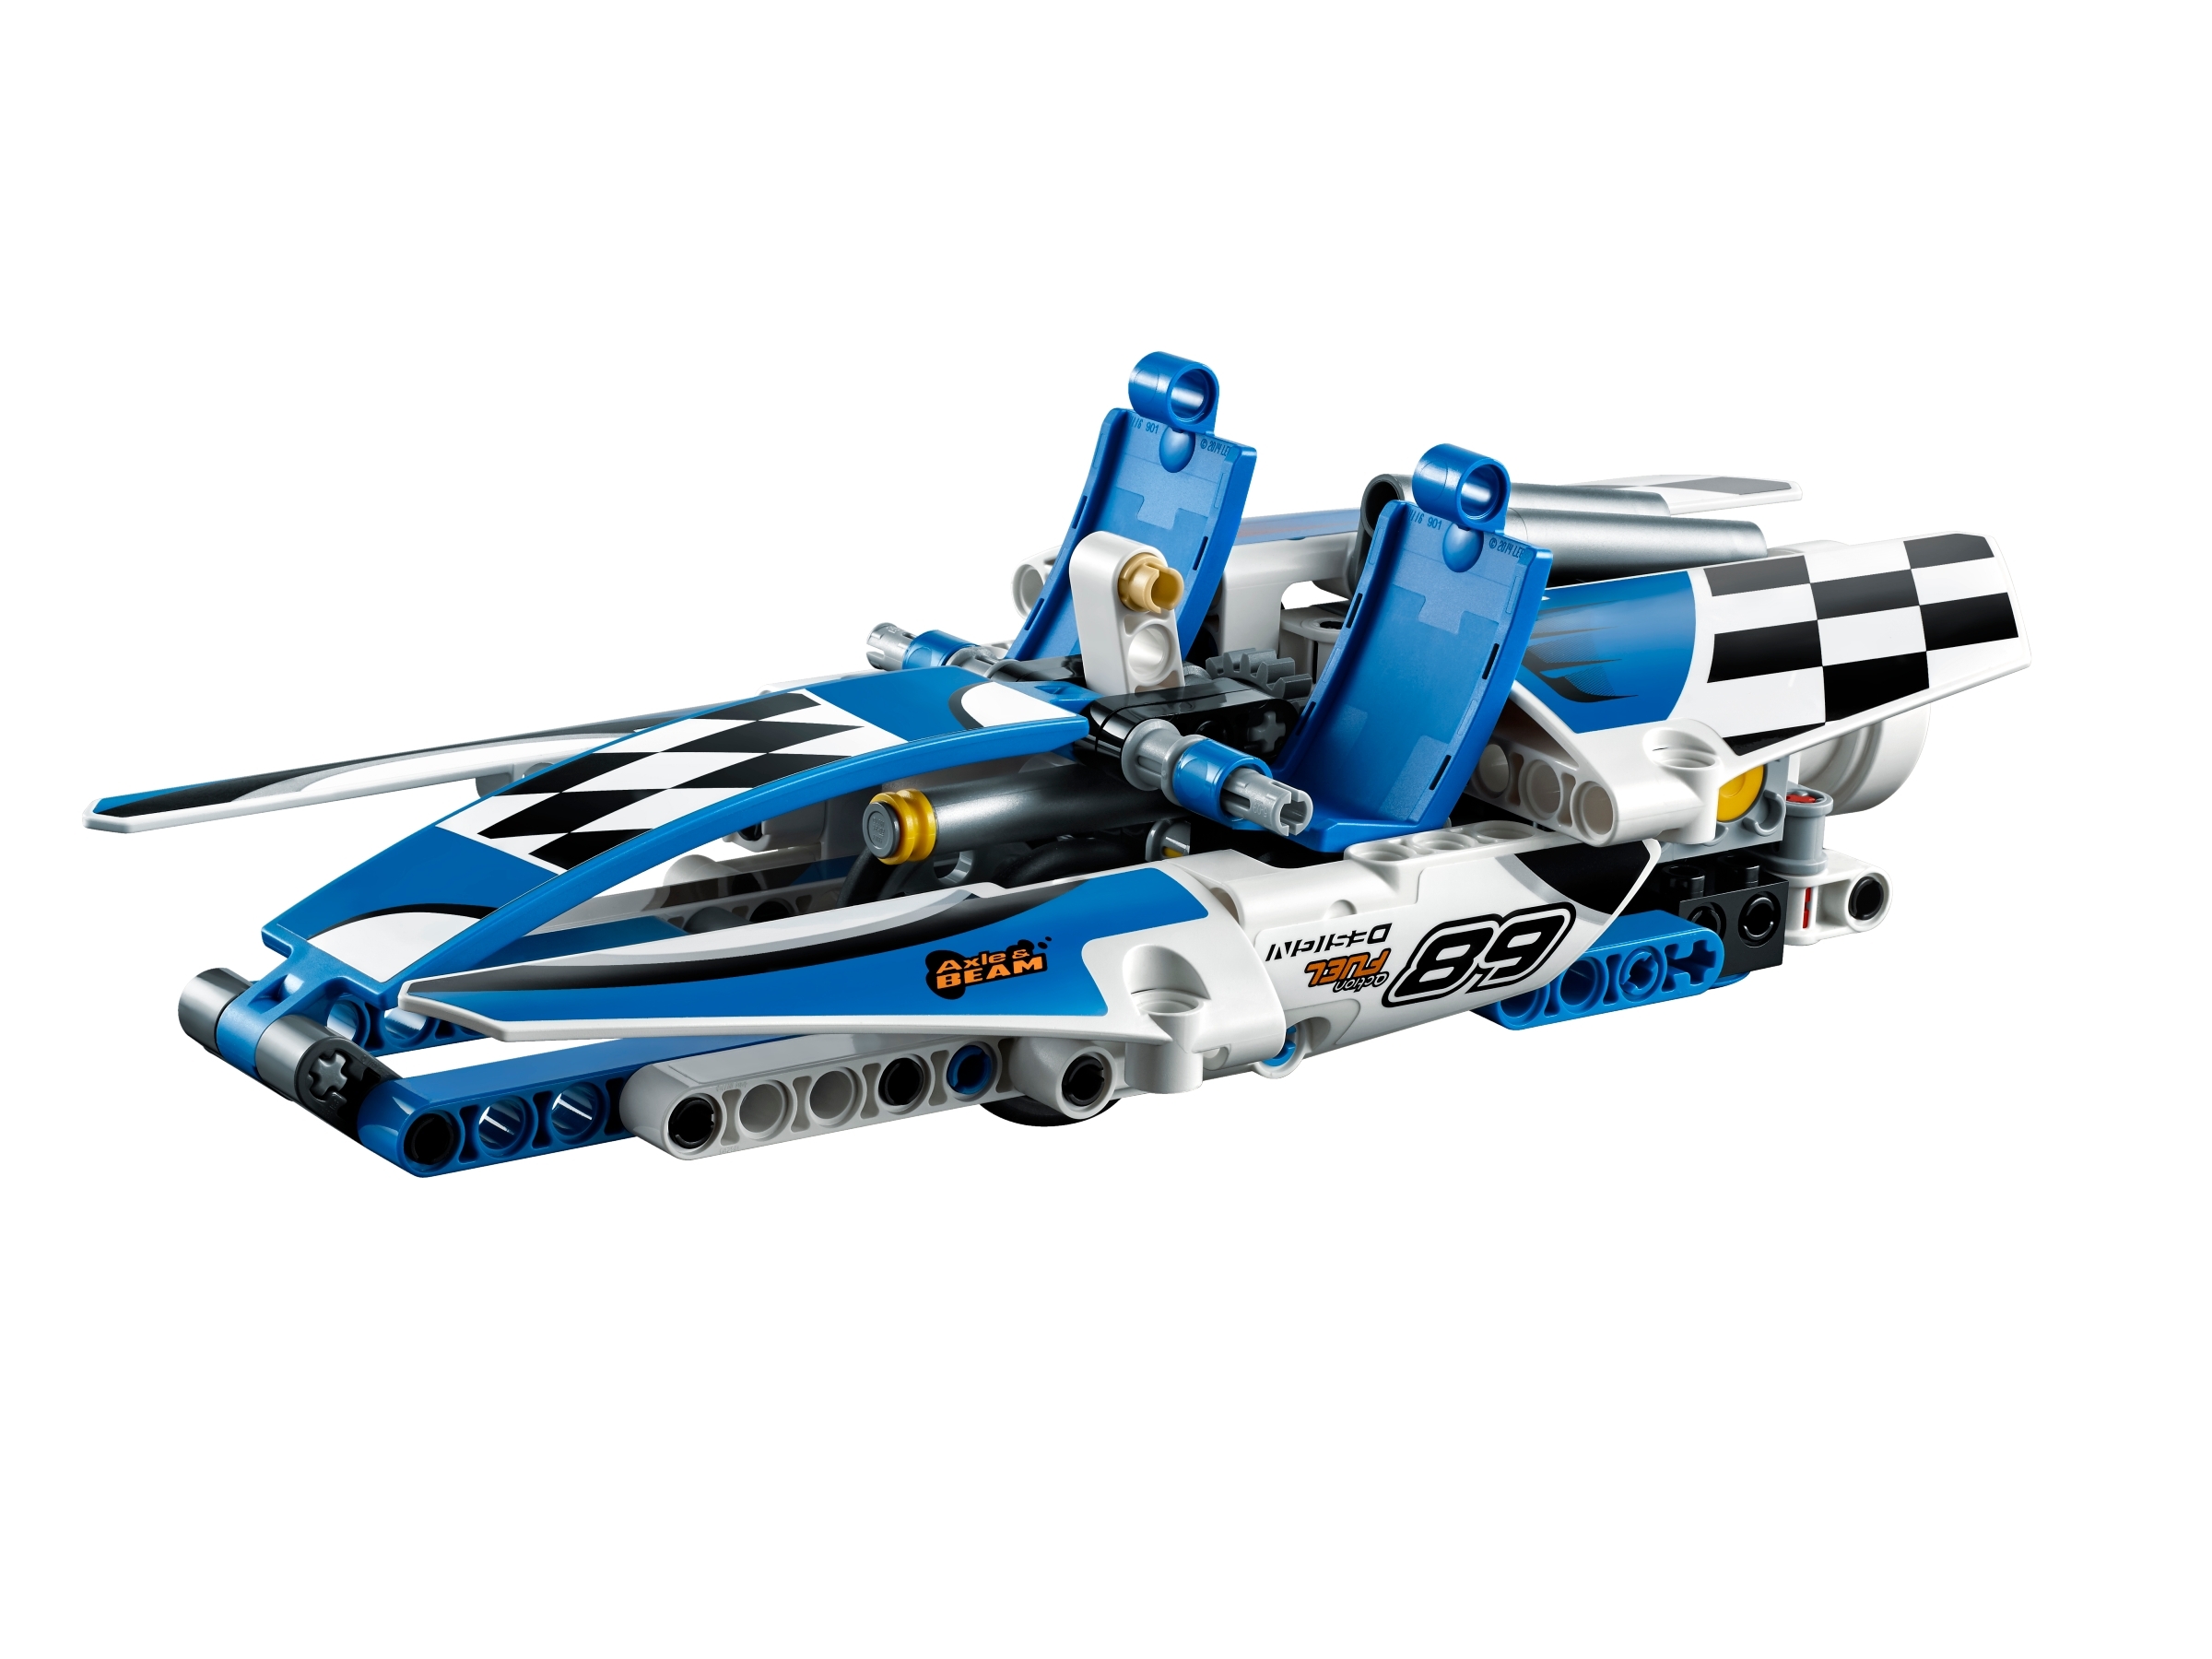 LEGO Technic 42045 Hydroplane Racer Mixed Set New In Box Sealed #42045 